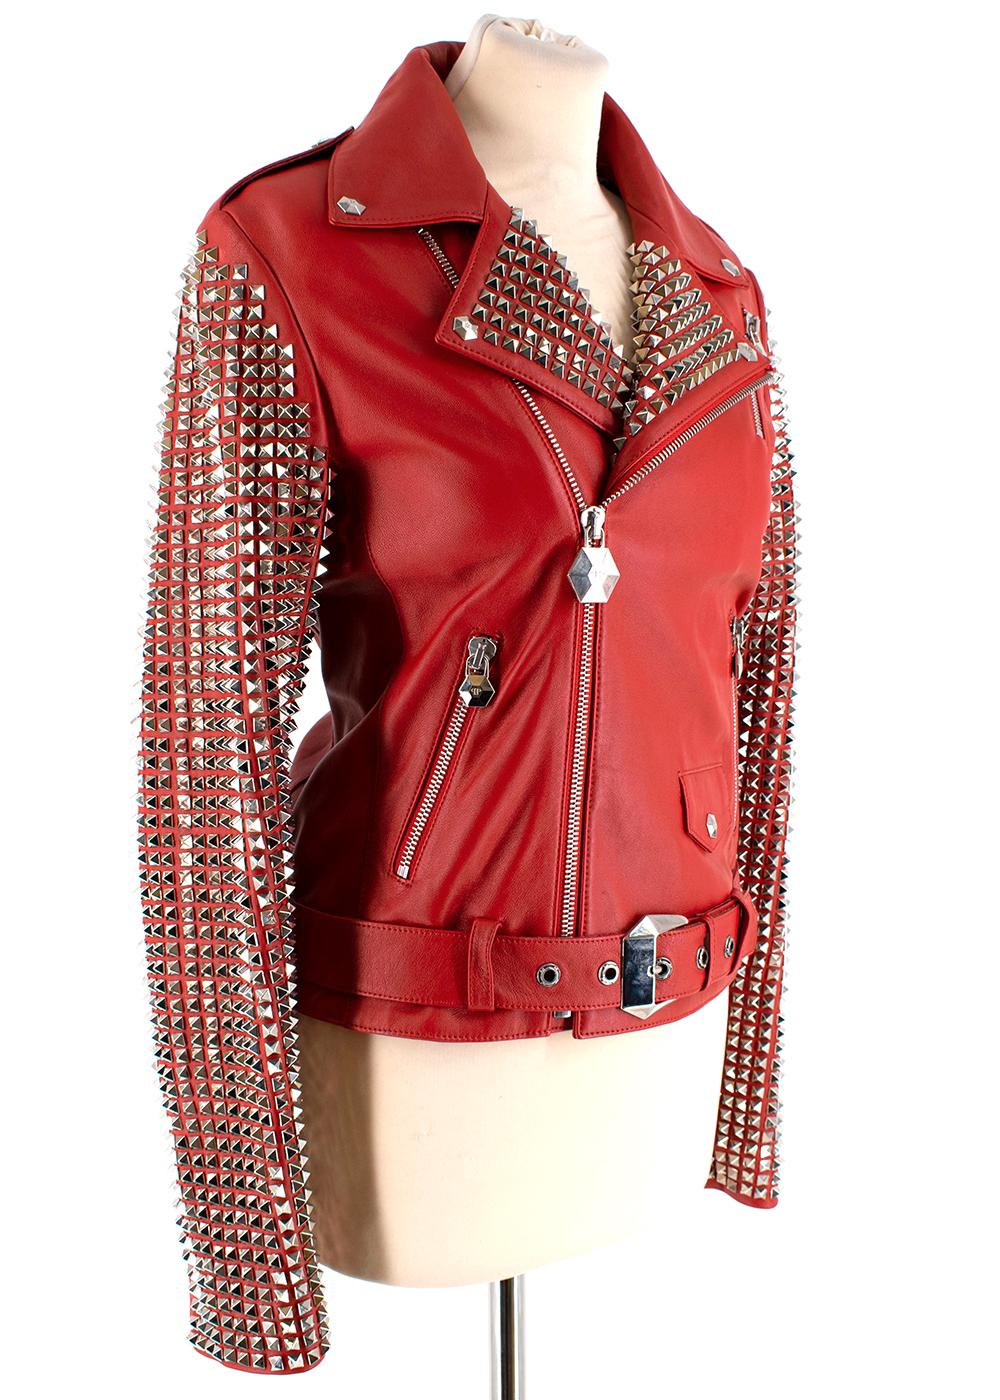 Philipp Plein Couture Embellished Red Leather Jacket

Extensive silver studding detail on collar and sleeves
Swarovski stone eagle on back
2 exterior zipped pockets
Made in Switzerland
Lined interior 

25cm shoulder
64cm sleeve
51cm length 